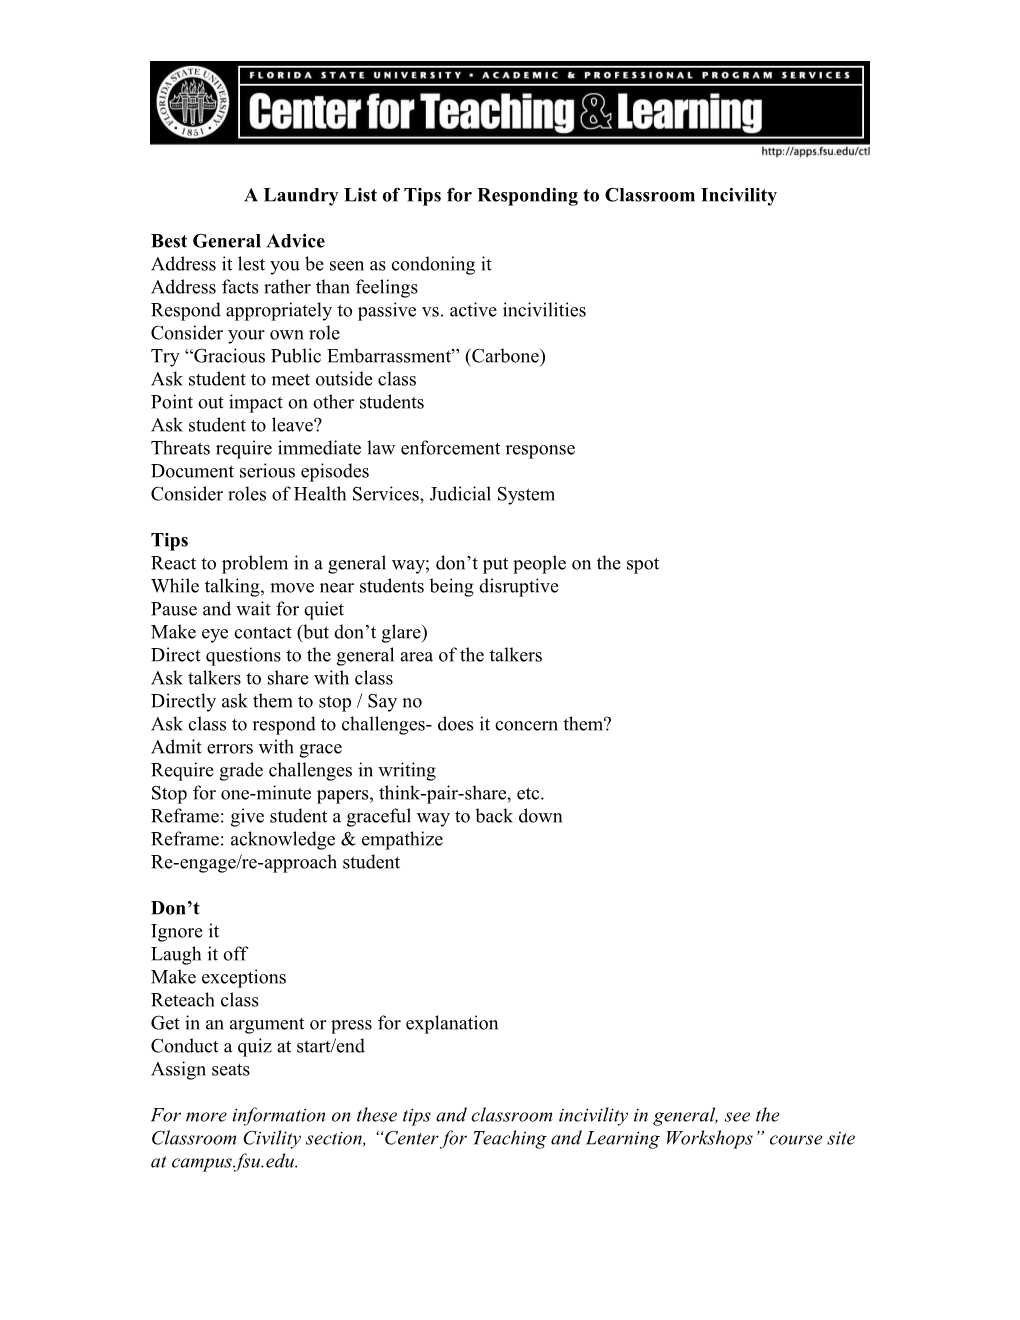 A Laundry List of Tips for Responding to Classroom Incivility